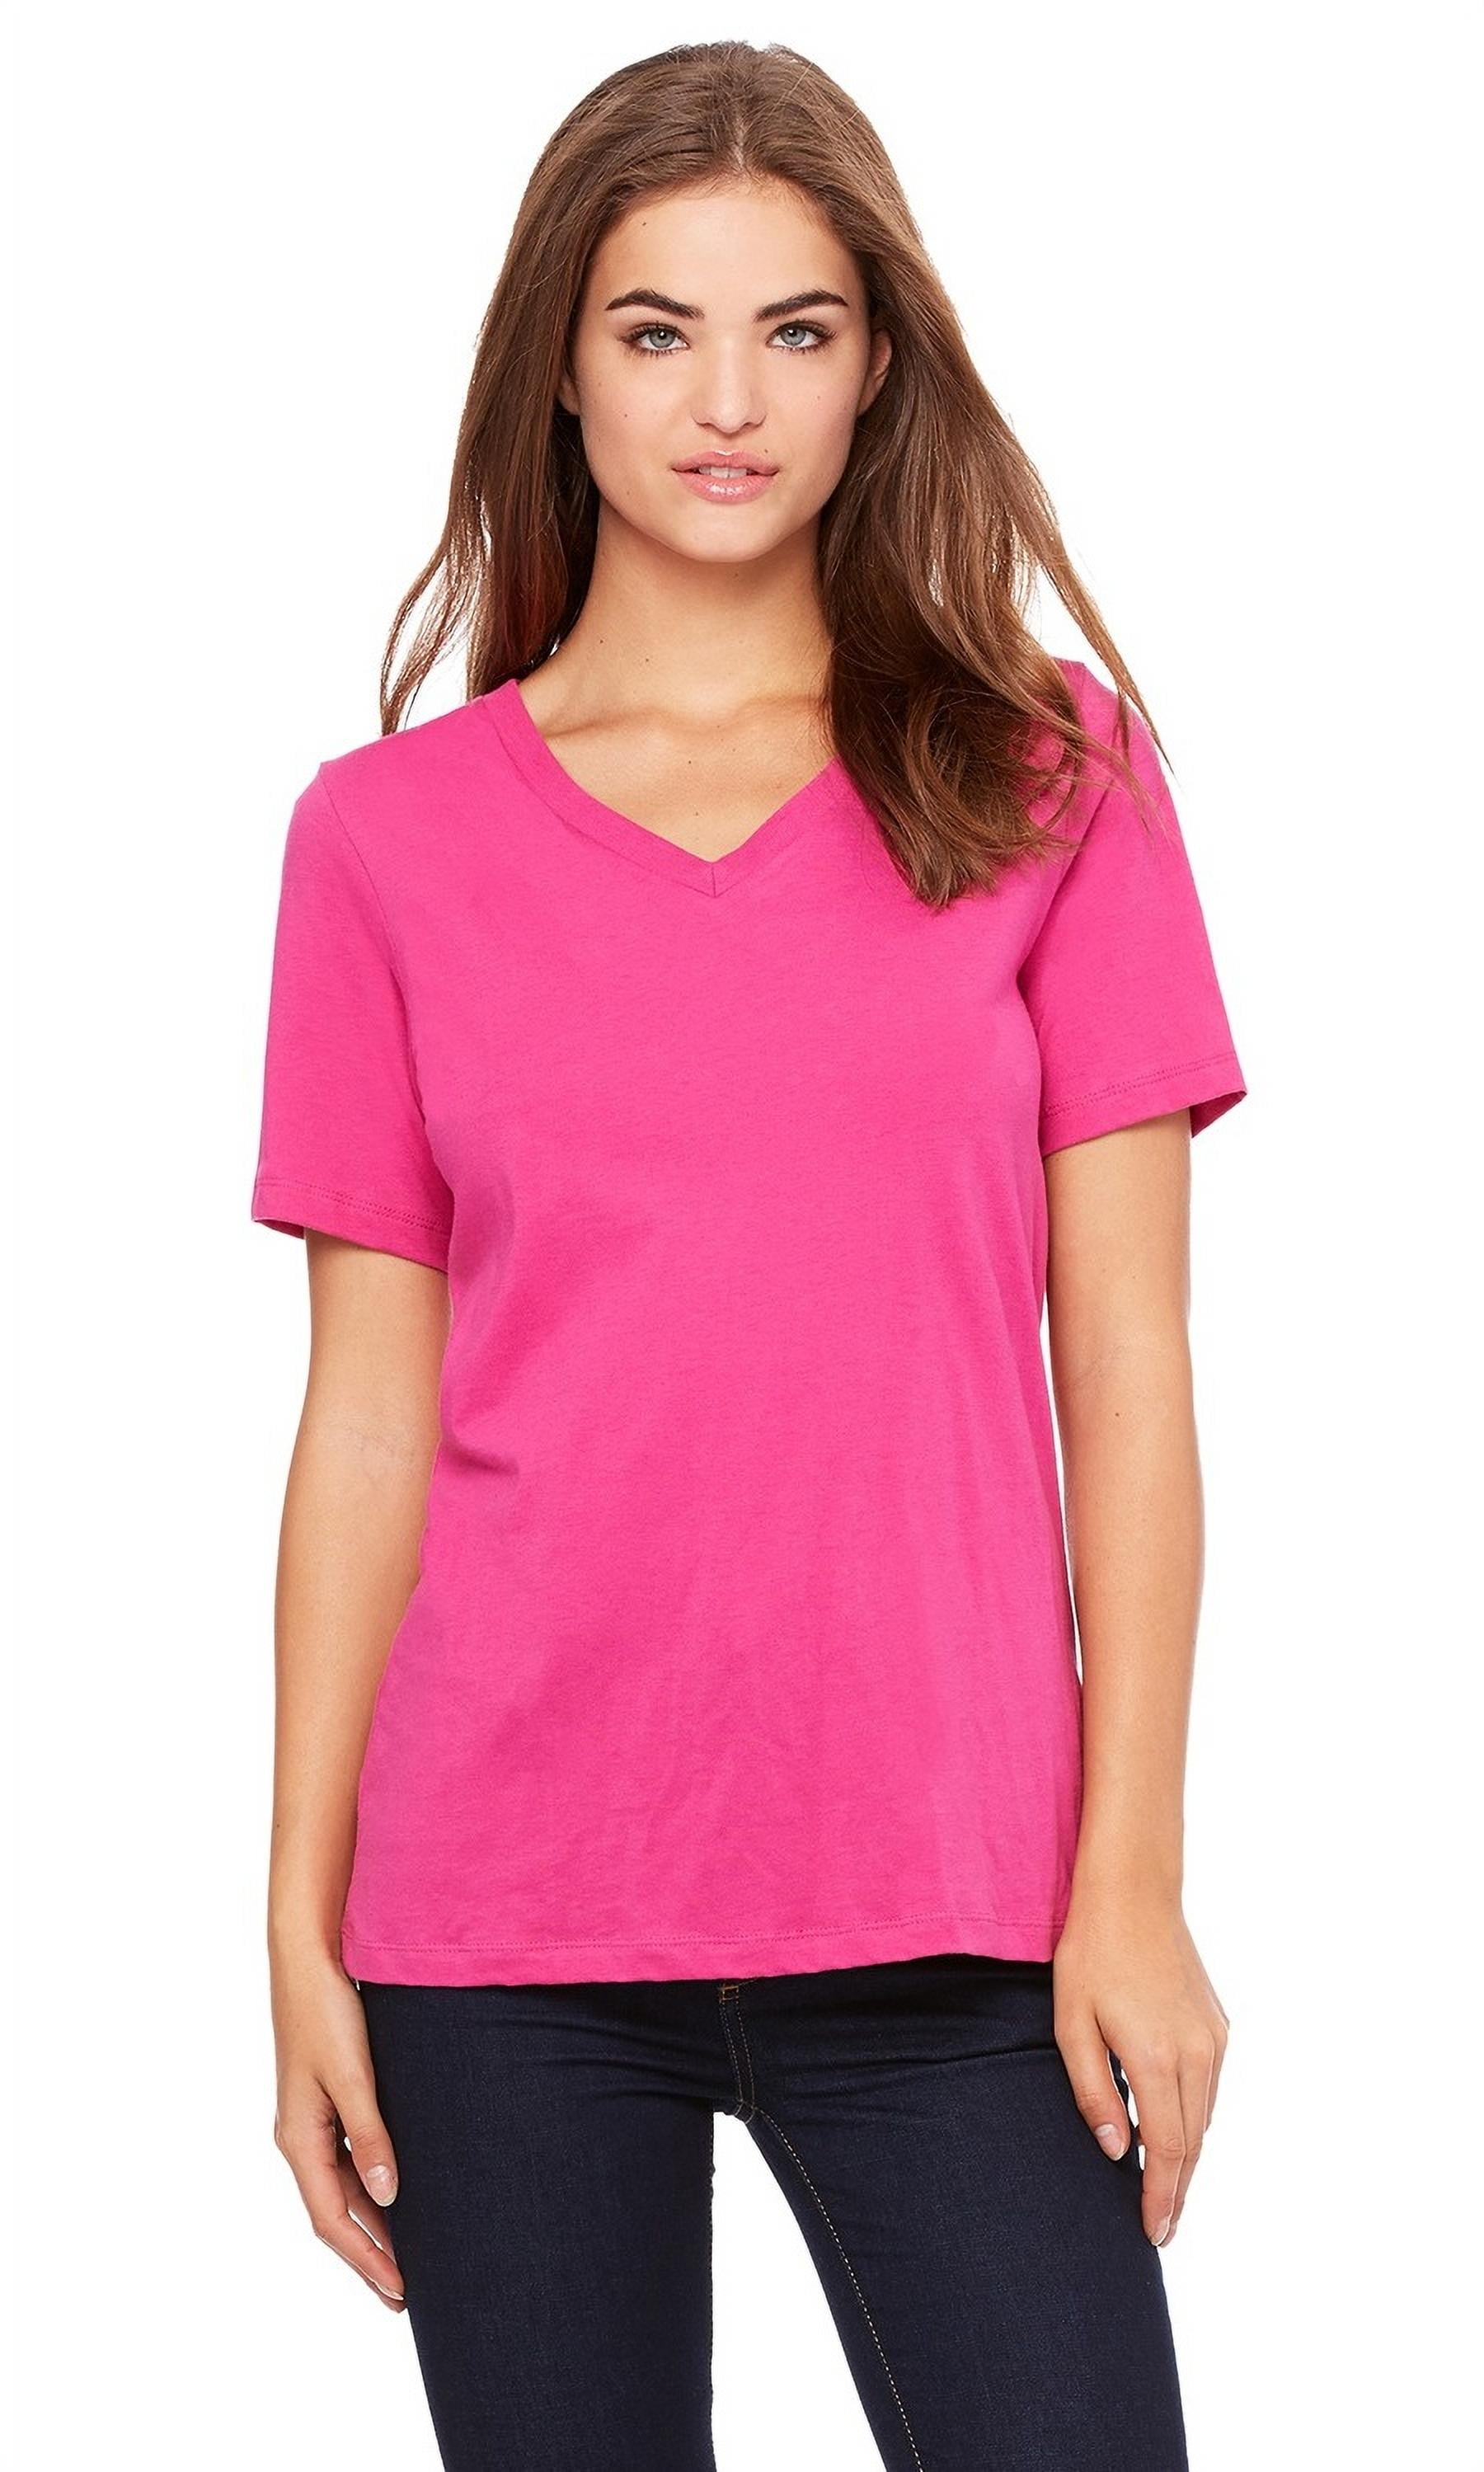 Bella + Canvas, The Ladies' Relaxed Jersey V-Neck T-Shirt - HEATHER PEACH -  XL